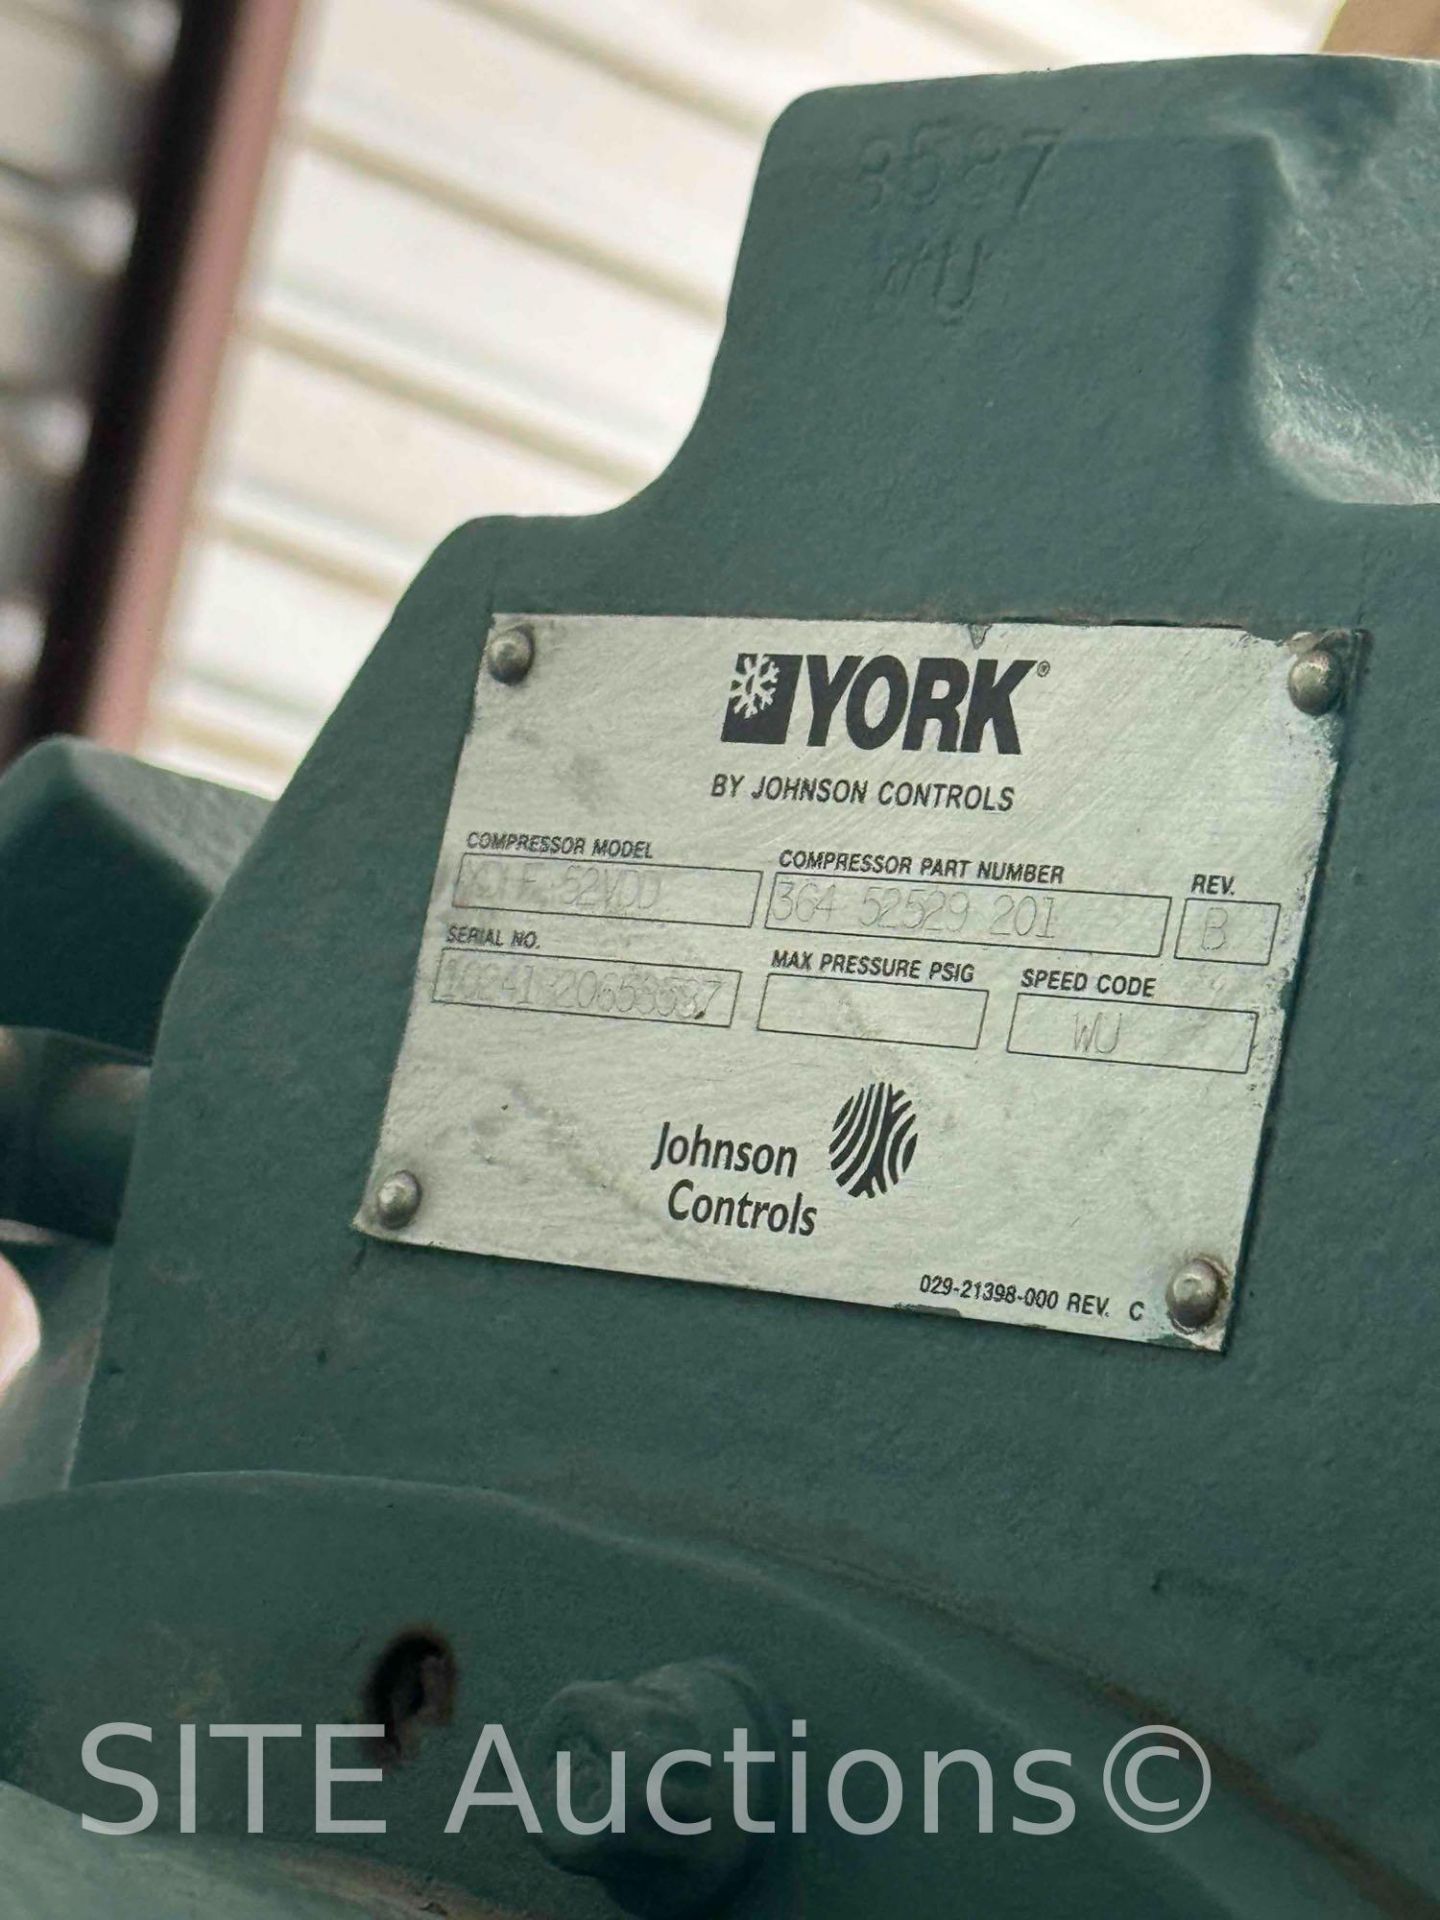 UNUSED 2012 York by Johnson Controls MaxE Centrifugal Chiller - Image 19 of 21